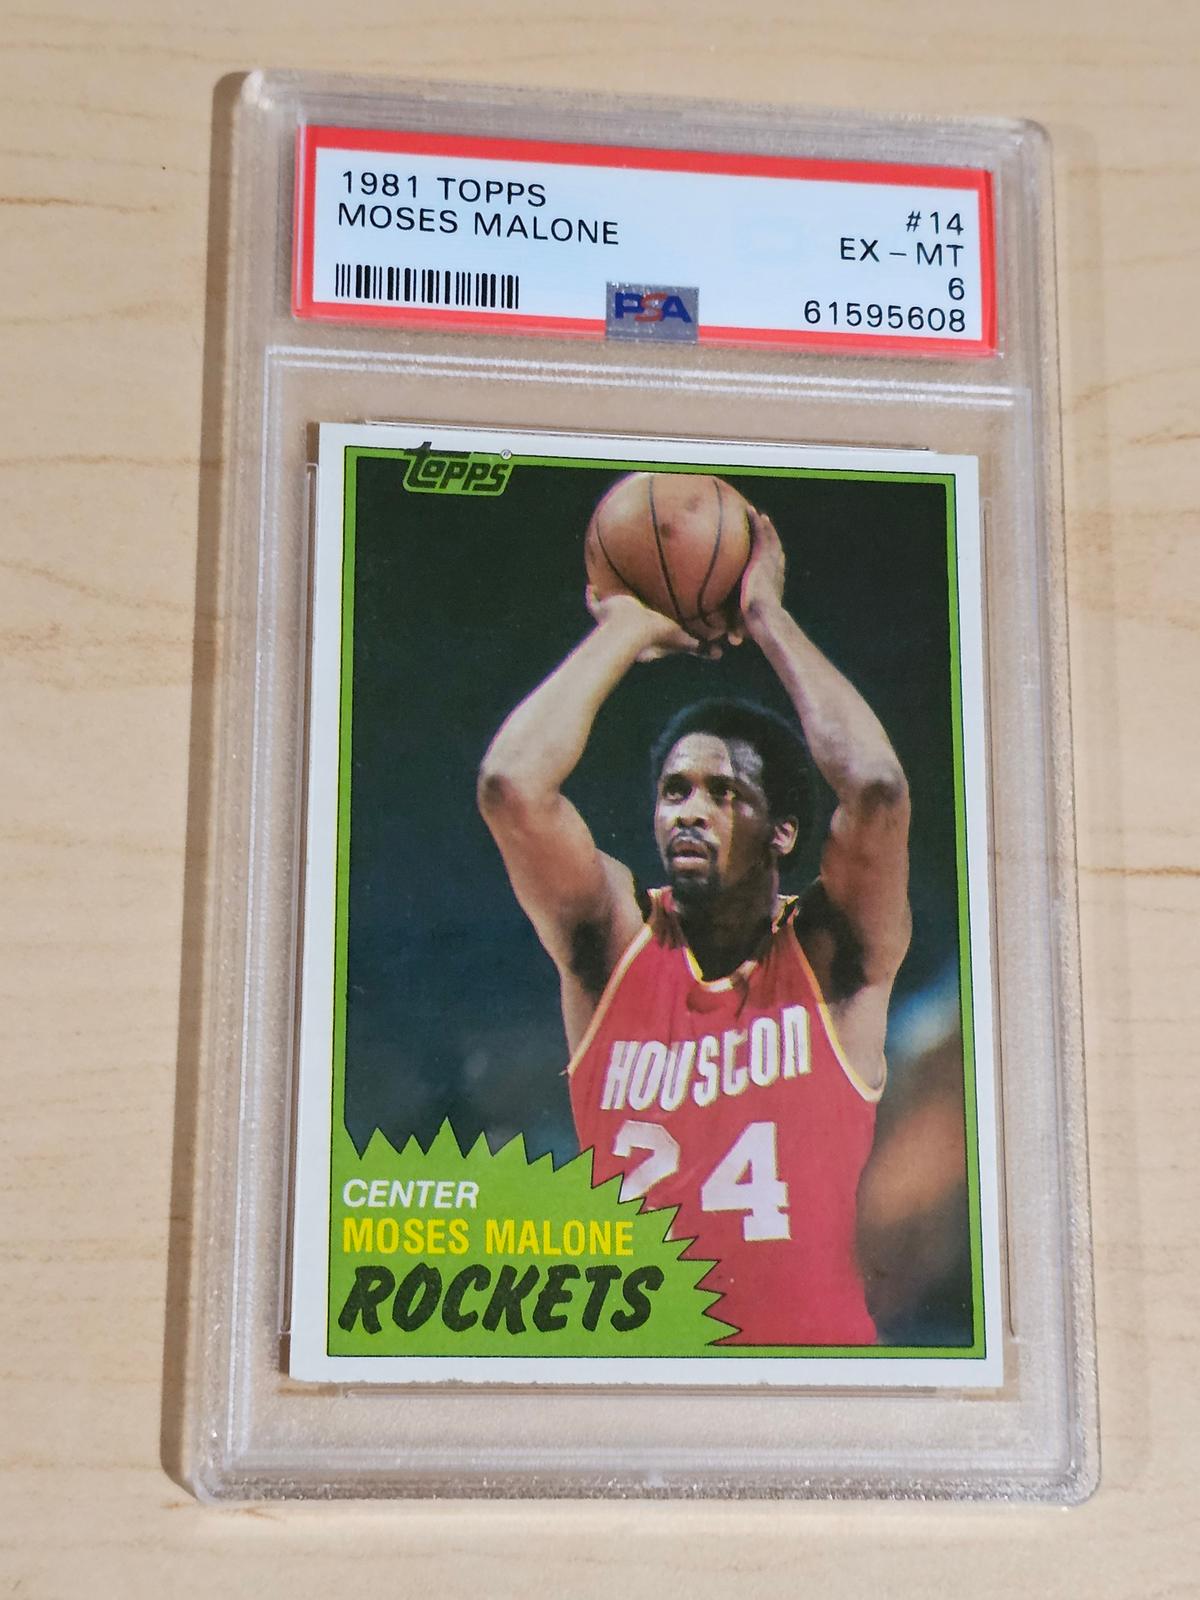 Topps 1981 Moses Malone Card - PSA Graded Mint 6